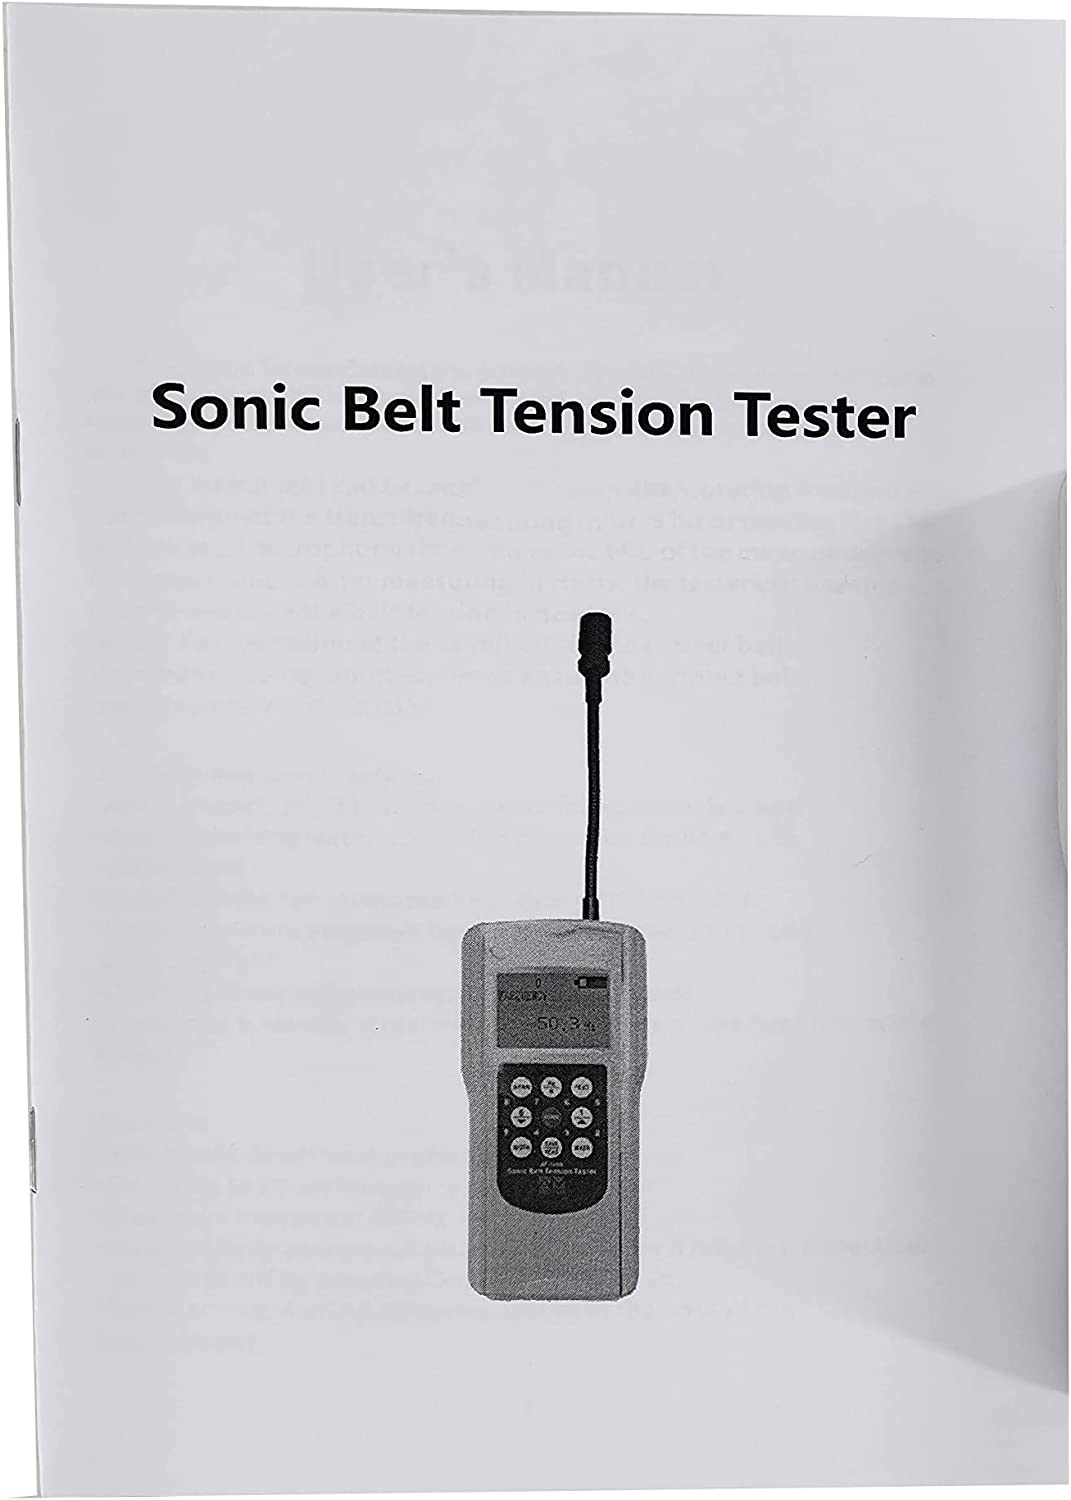 VTSYIQI Sonic Belt Tension Meter Tester Gauge Acoustic Belt Tensionmeter with LCD Display Unit Hz/N Measuring Range 10 to 680Hz Display Accuracy 土1Hz for Measuring Transmission Belt Vibration Frequency